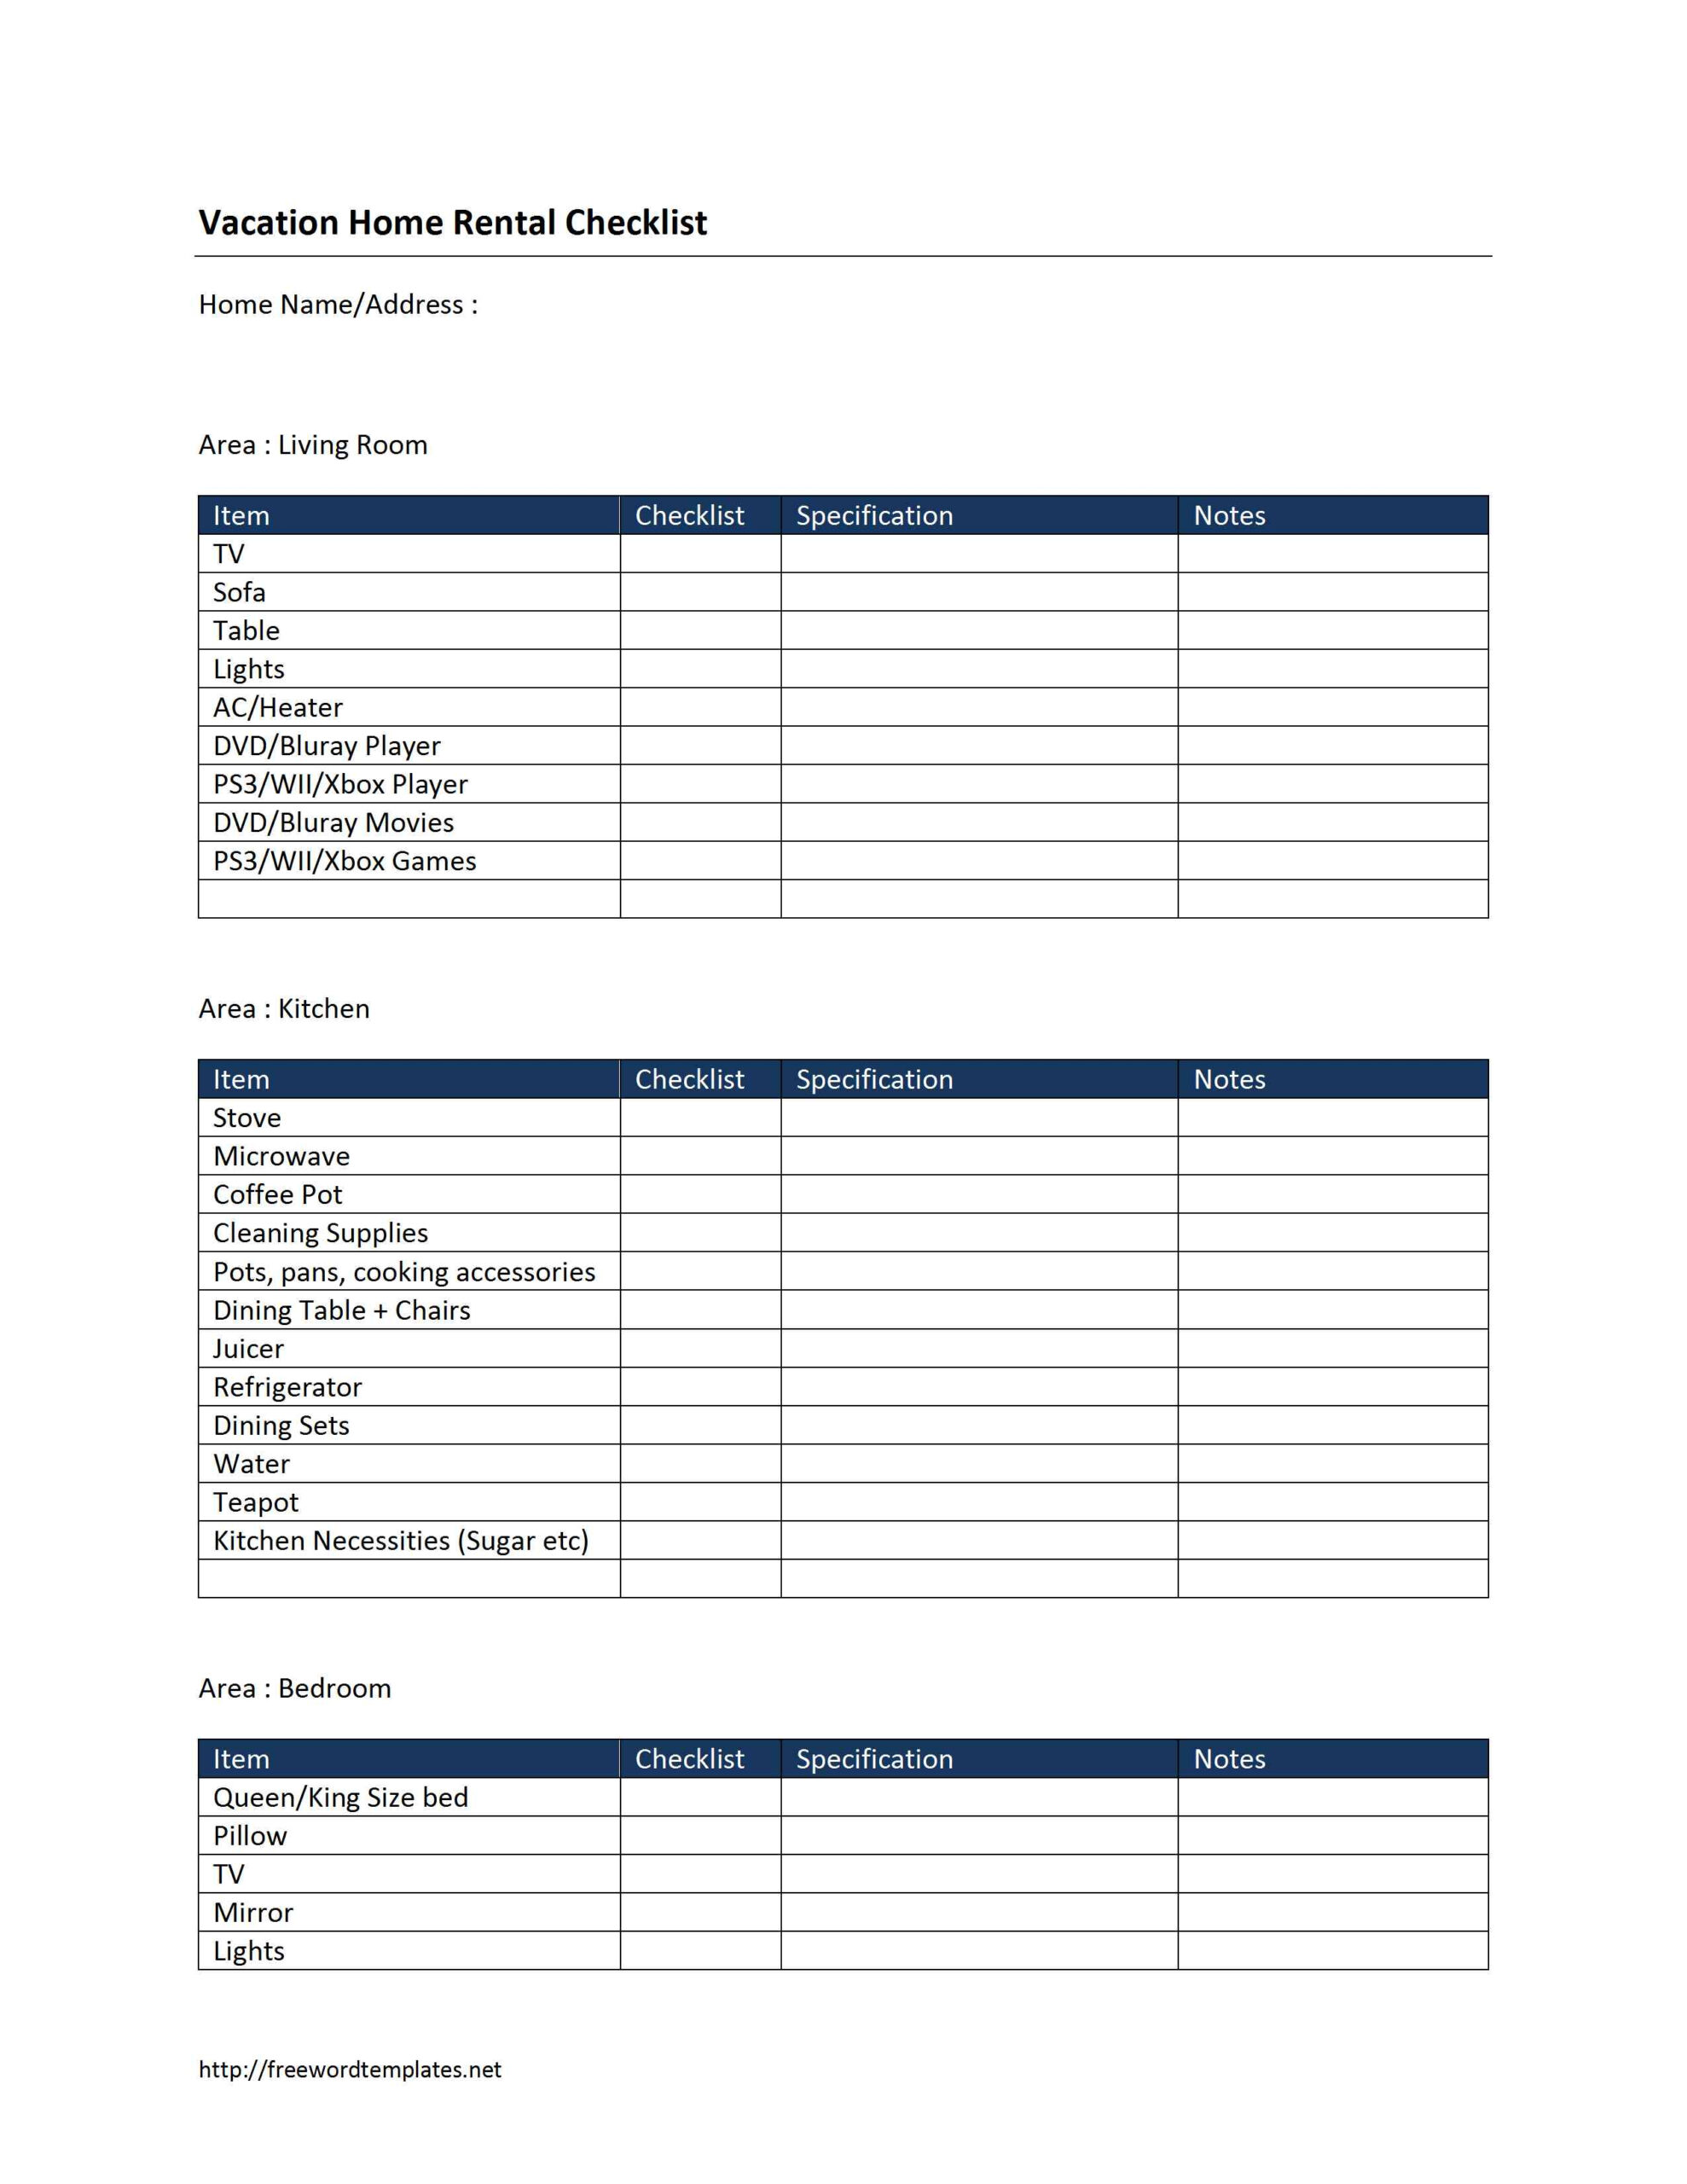 Vacation Home Rental Checklist Template Within Apartment Hunting Checklist Template Within Apartment Hunting Checklist Template